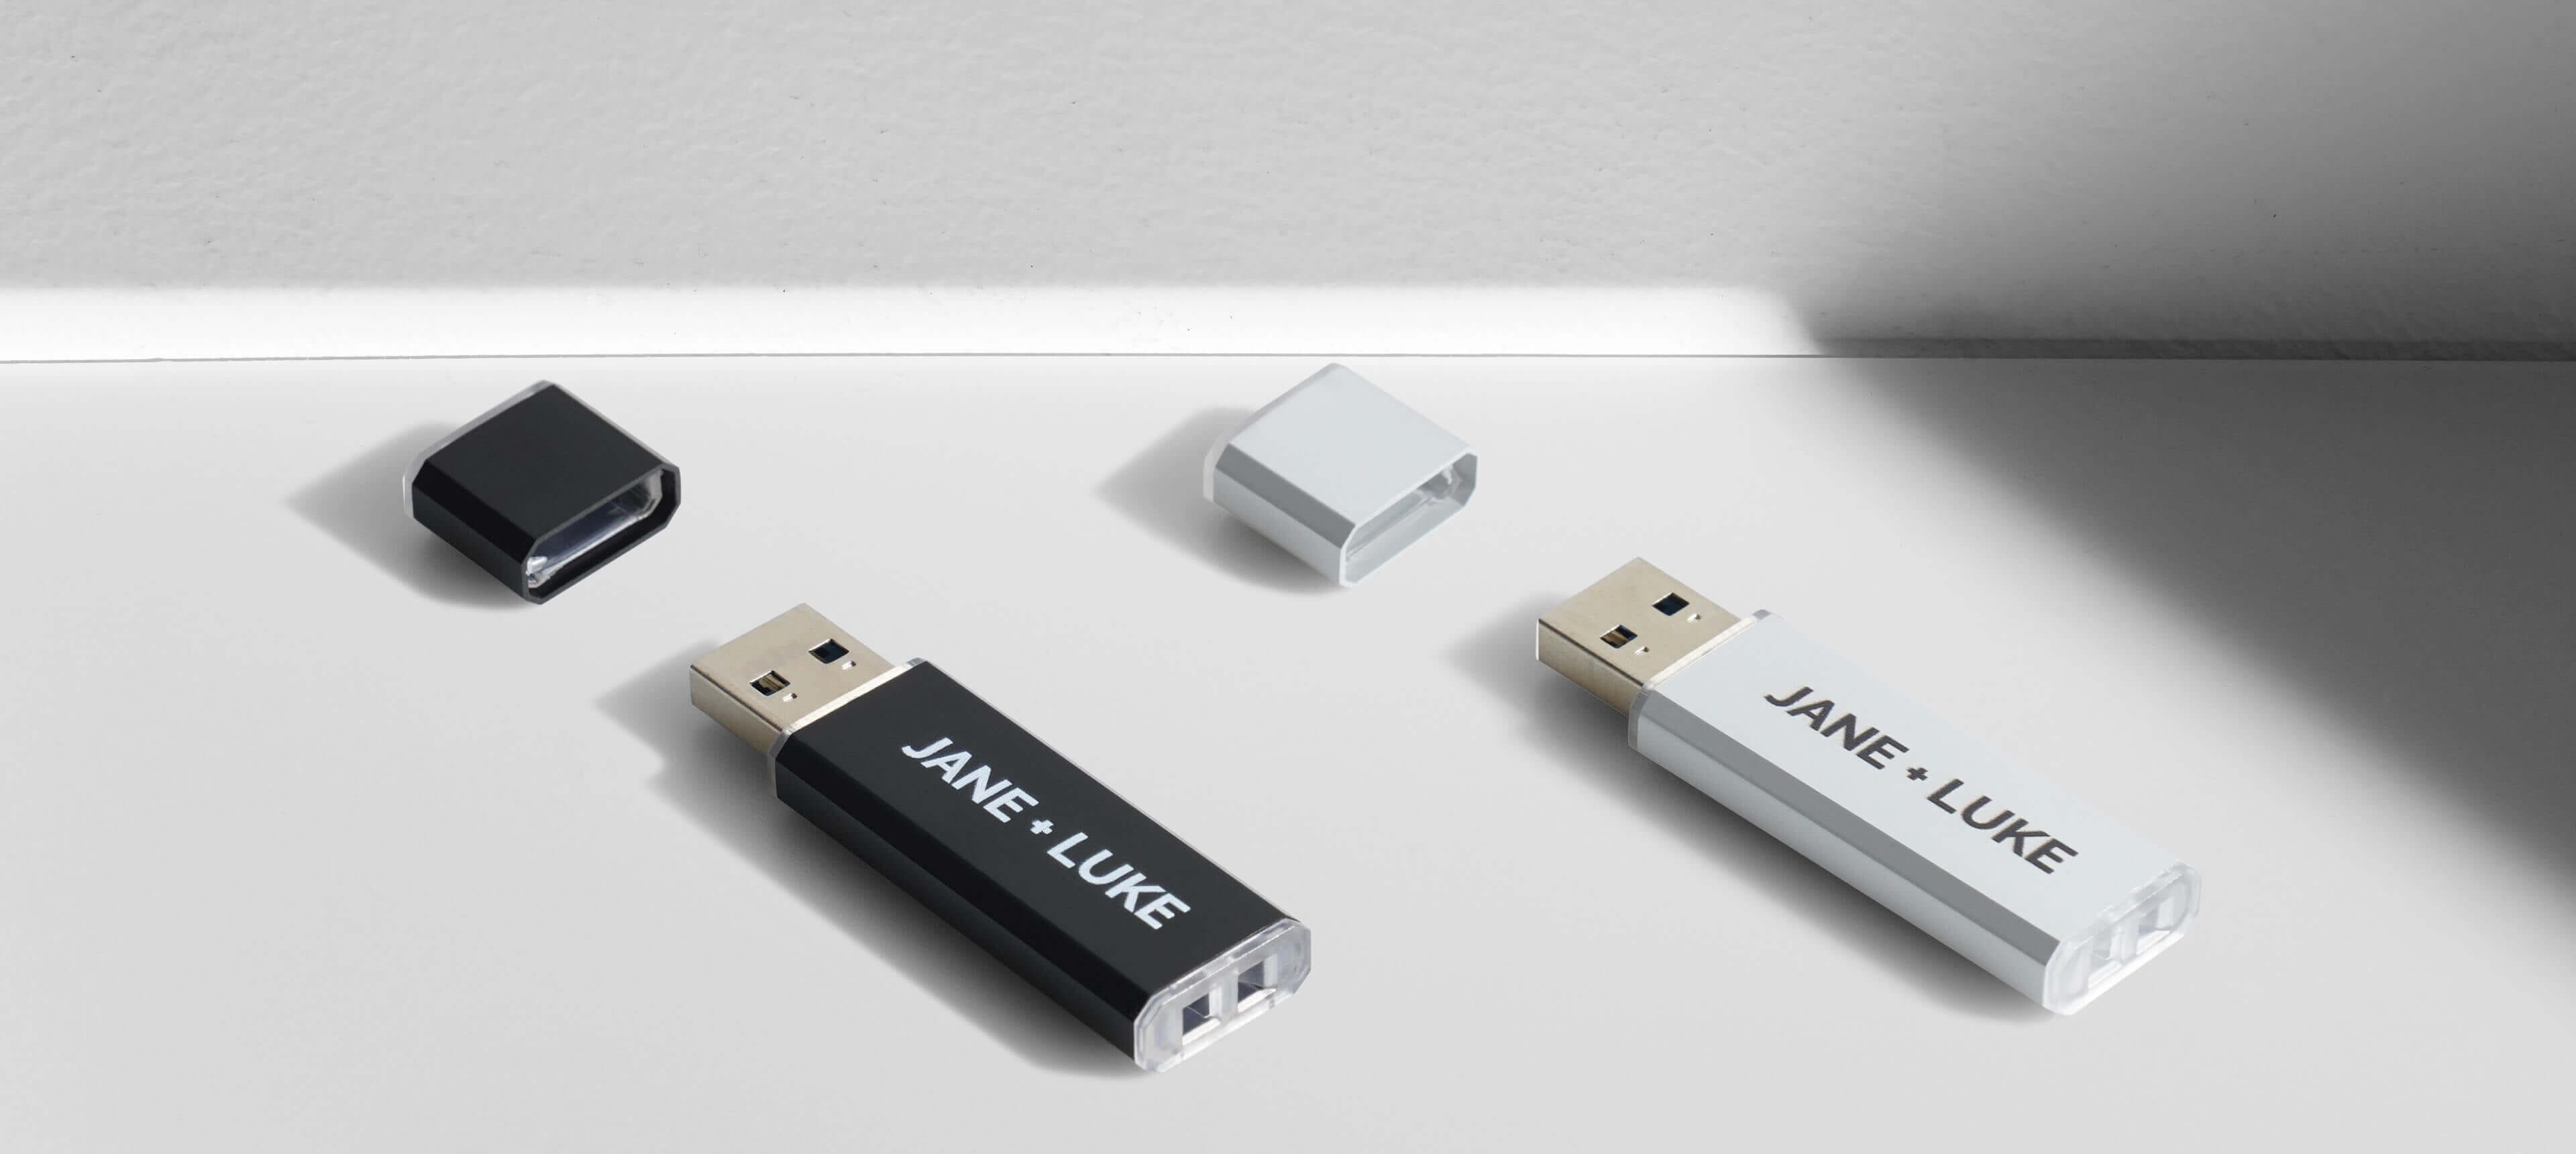 two metal usb drives in different colors on a white table